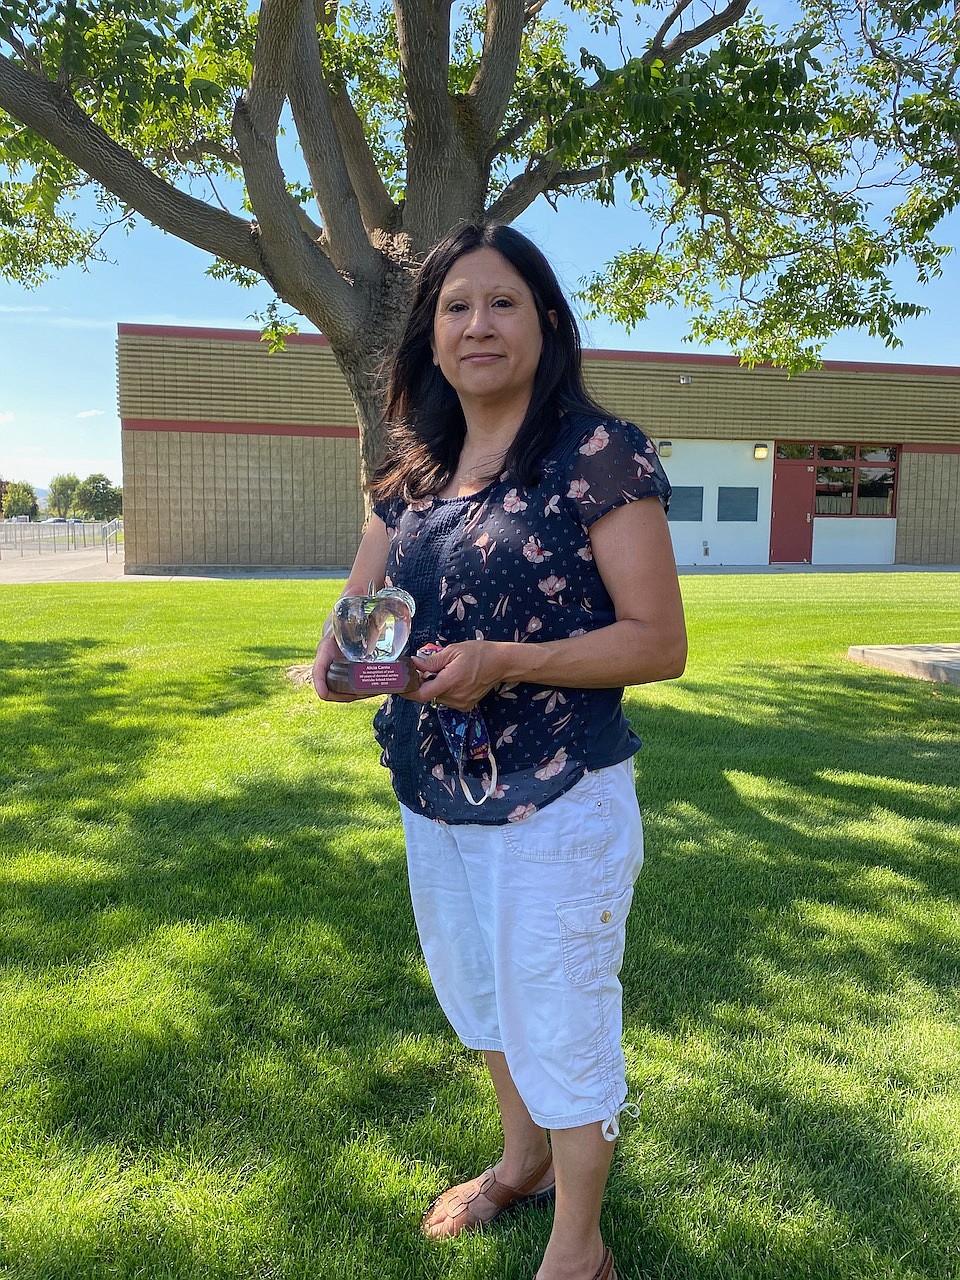 Alicia Cantu holds up the Crystal Apple, which was presented to her after 30 years of service to the Wahluke School District.